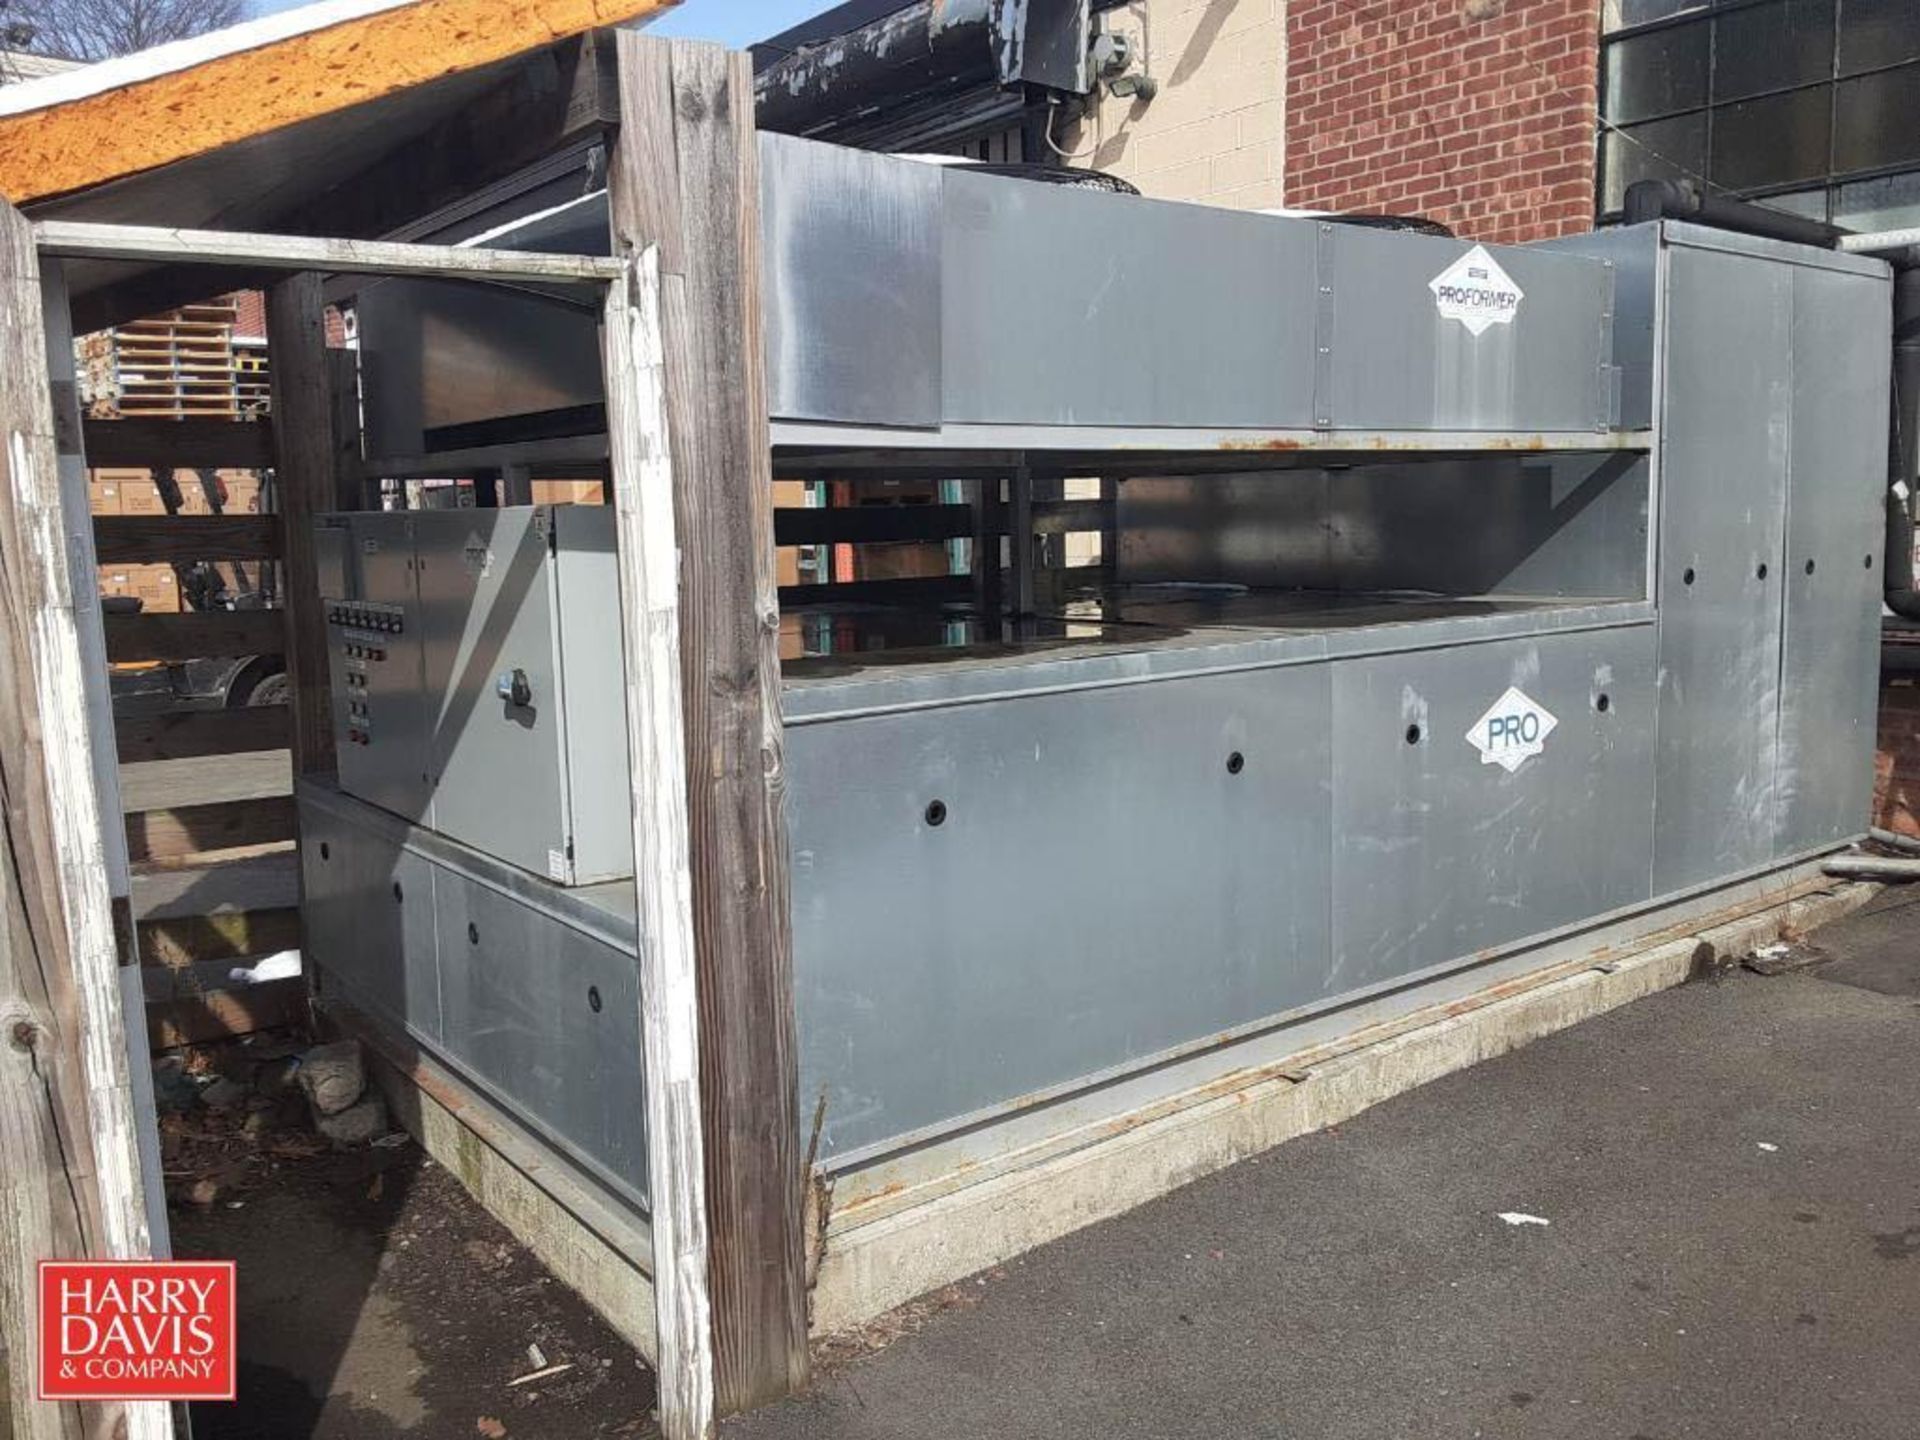 2015 Pro Refrigeration ProChiller Packaged Glycol Chiller System, Model: PB220F10R4550-A-VC, S/N: 20 - Image 3 of 12